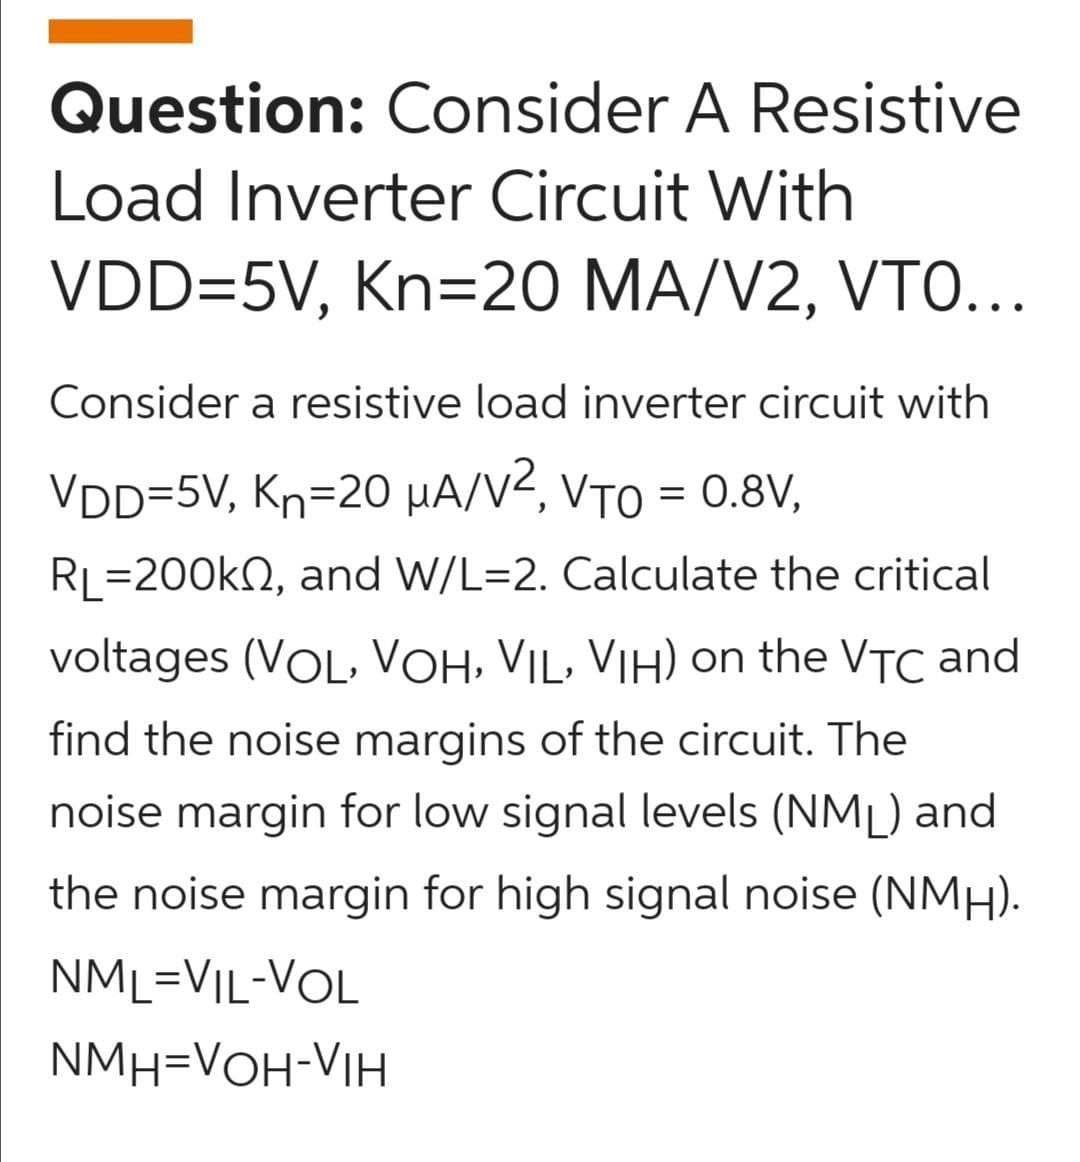 Question: Consider A Resistive
Load Inverter Circuit With
VDD=5V, Kn=20 MA/V2, VTO..
Consider a resistive load inverter circuit with
VDD=5V, Kn=20 µA/V², VTO = 0.8V,
RL=200kN, and W/L=2. Calculate the critical
voltages (VOL, VOH, VIL, VIH) on the VTC and
find the noise margins of the circuit. The
noise margin for low signal levels (NML) and
the noise margin for high signal noise (NMH).
NML=VIL-VOL
NMH=VOH-VIH
